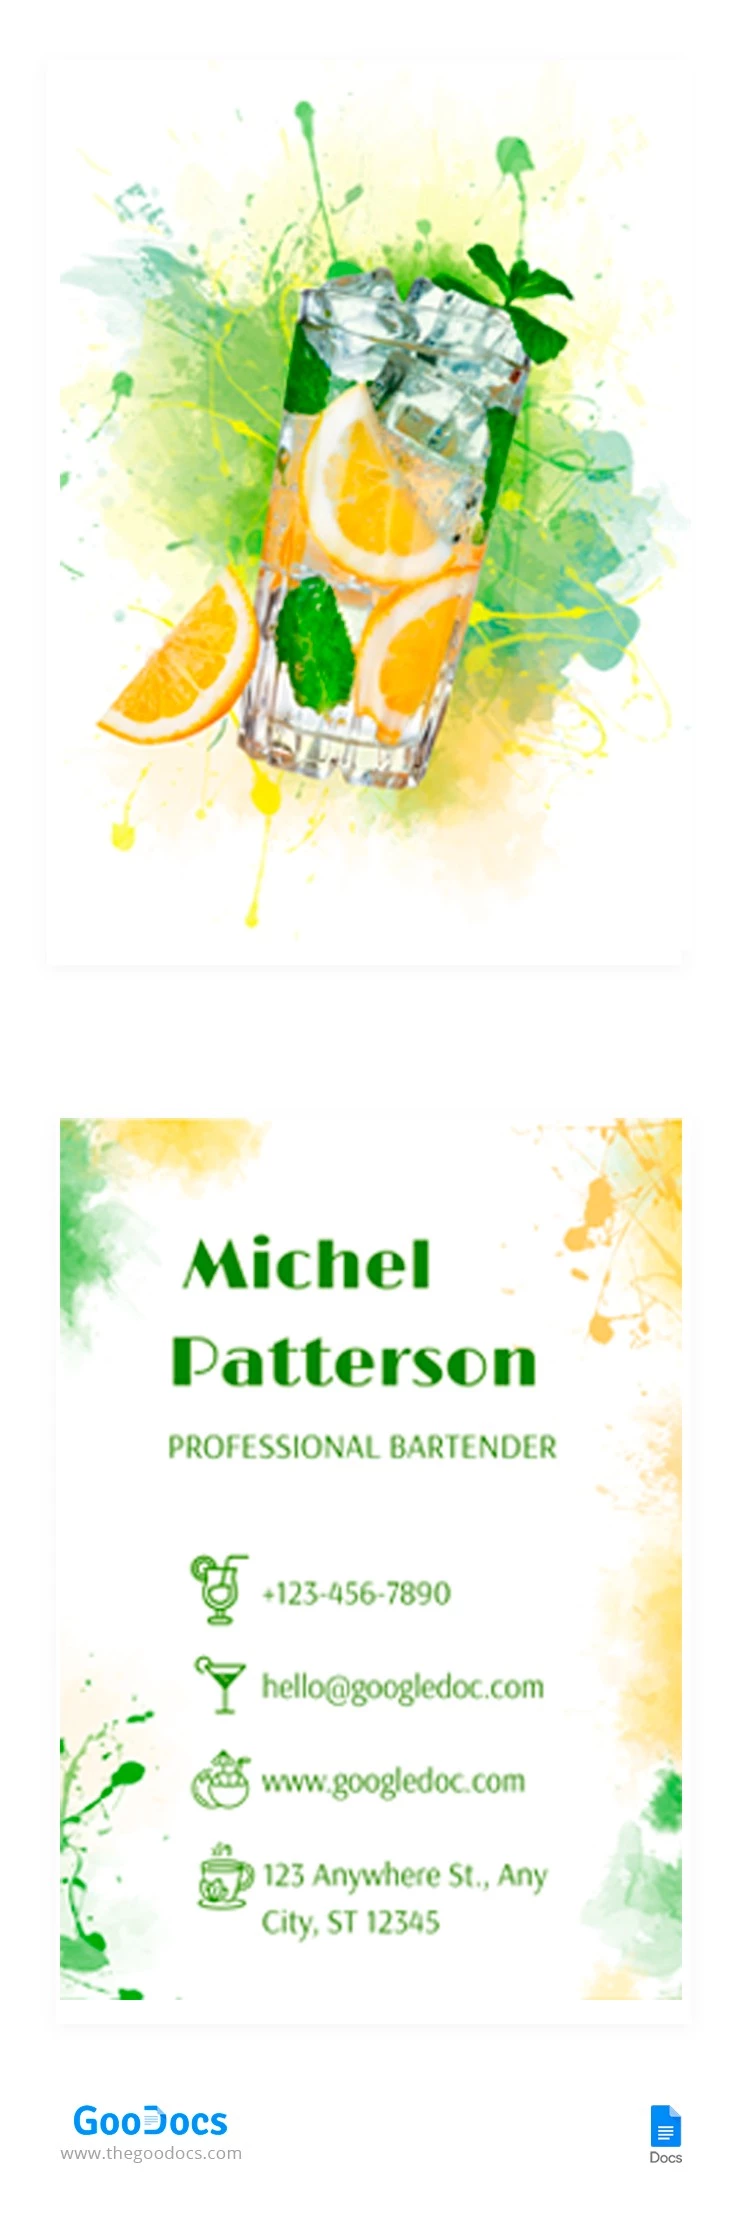 Colorful Bartender Business Card - free Google Docs Template - 10065173